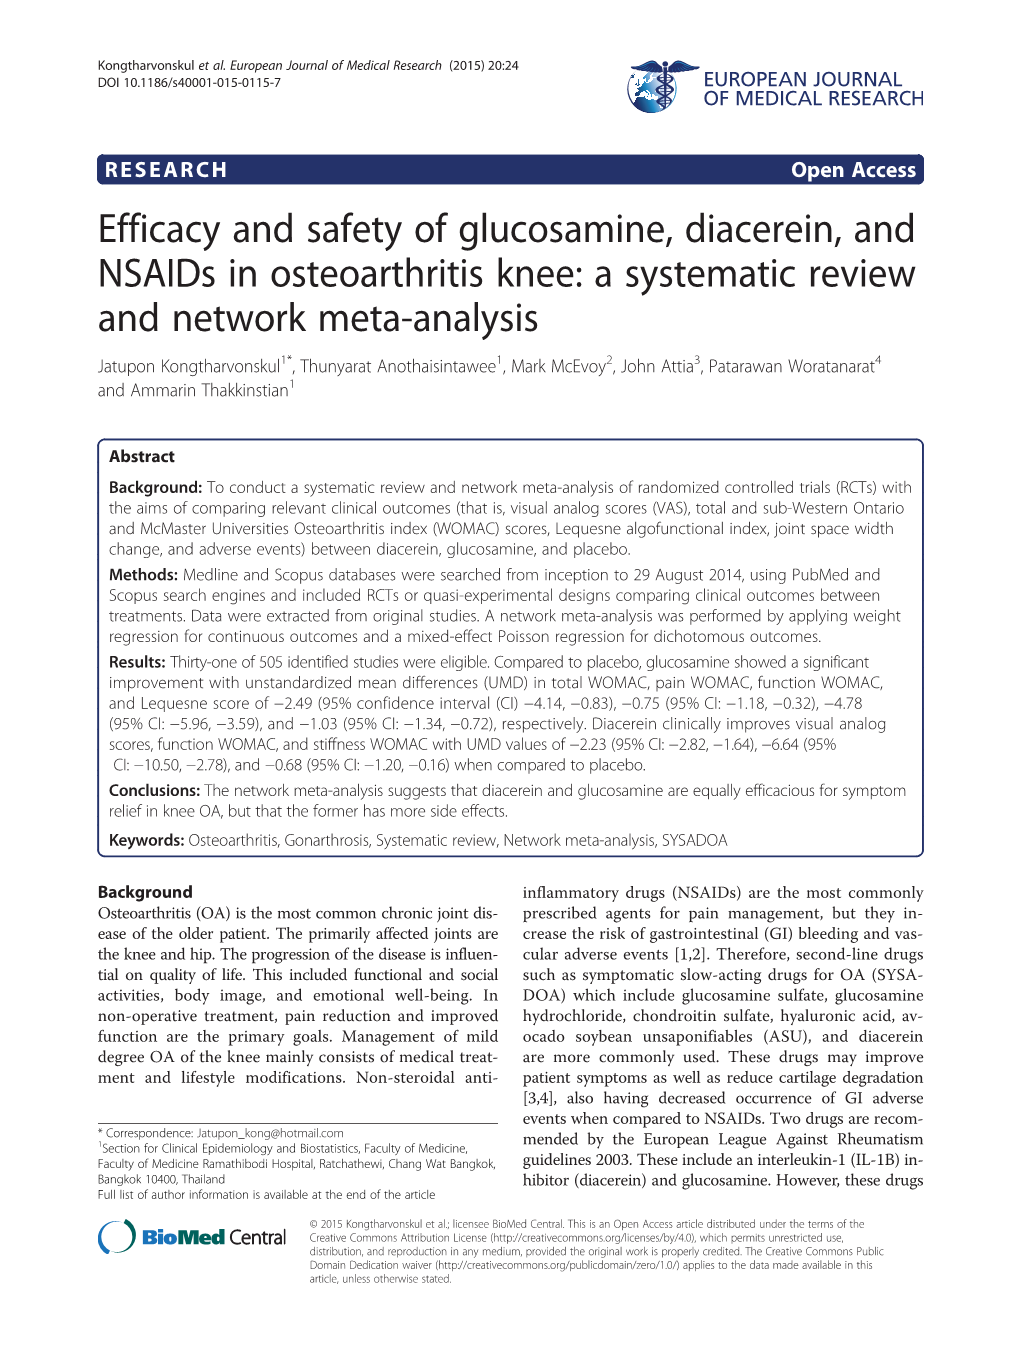 Efficacy and Safety of Glucosamine, Diacerein, and Nsaids In